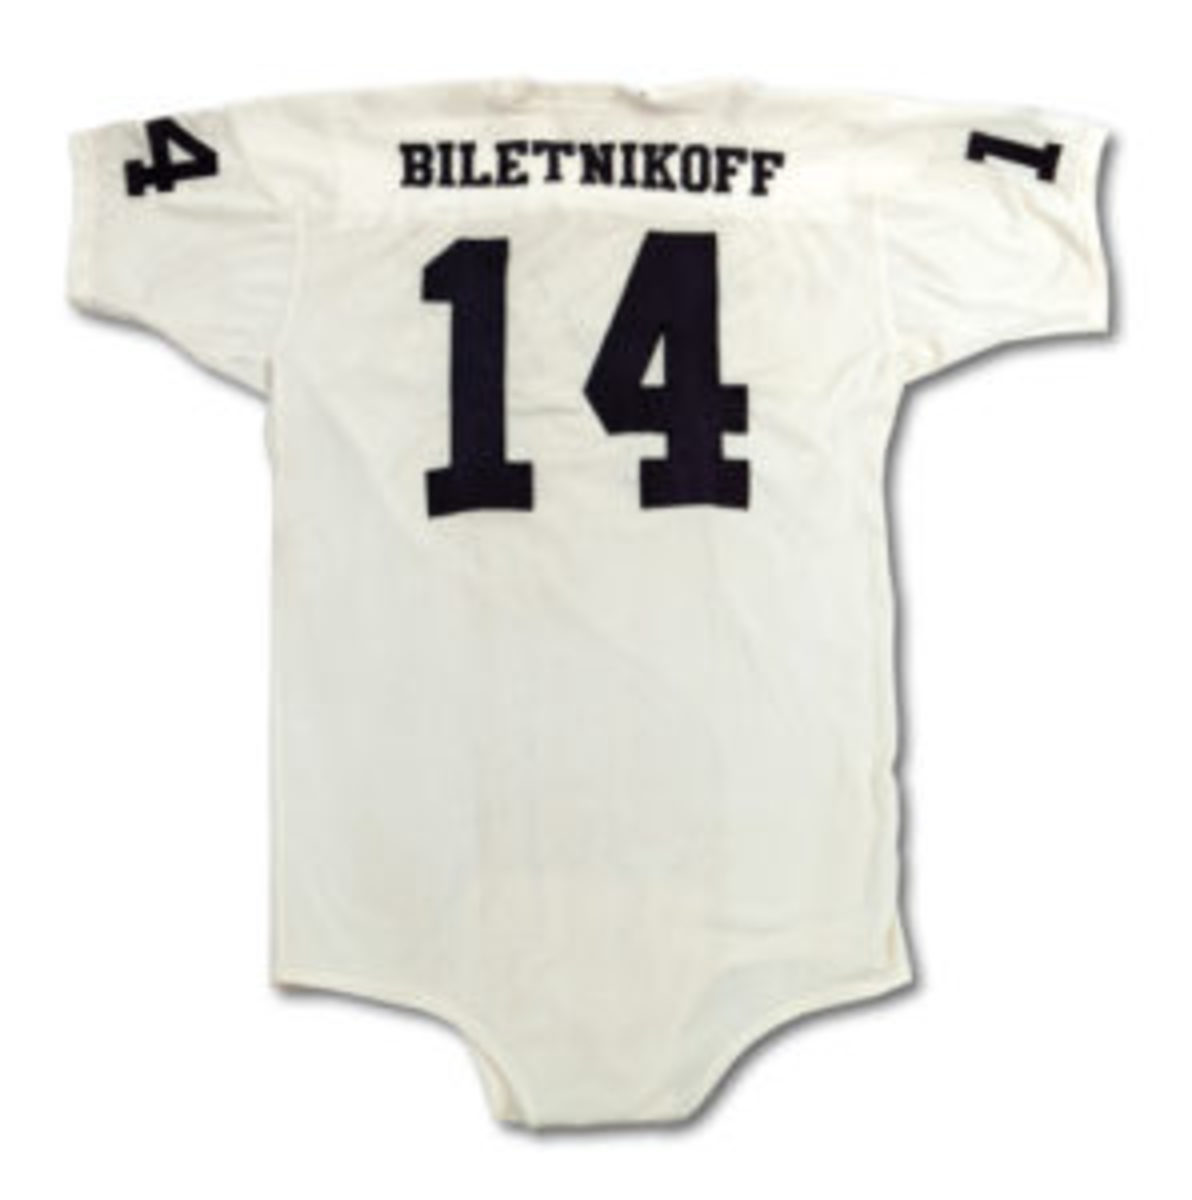 1965 Fred Biletnikoff rare #14 jersey available at auction ...